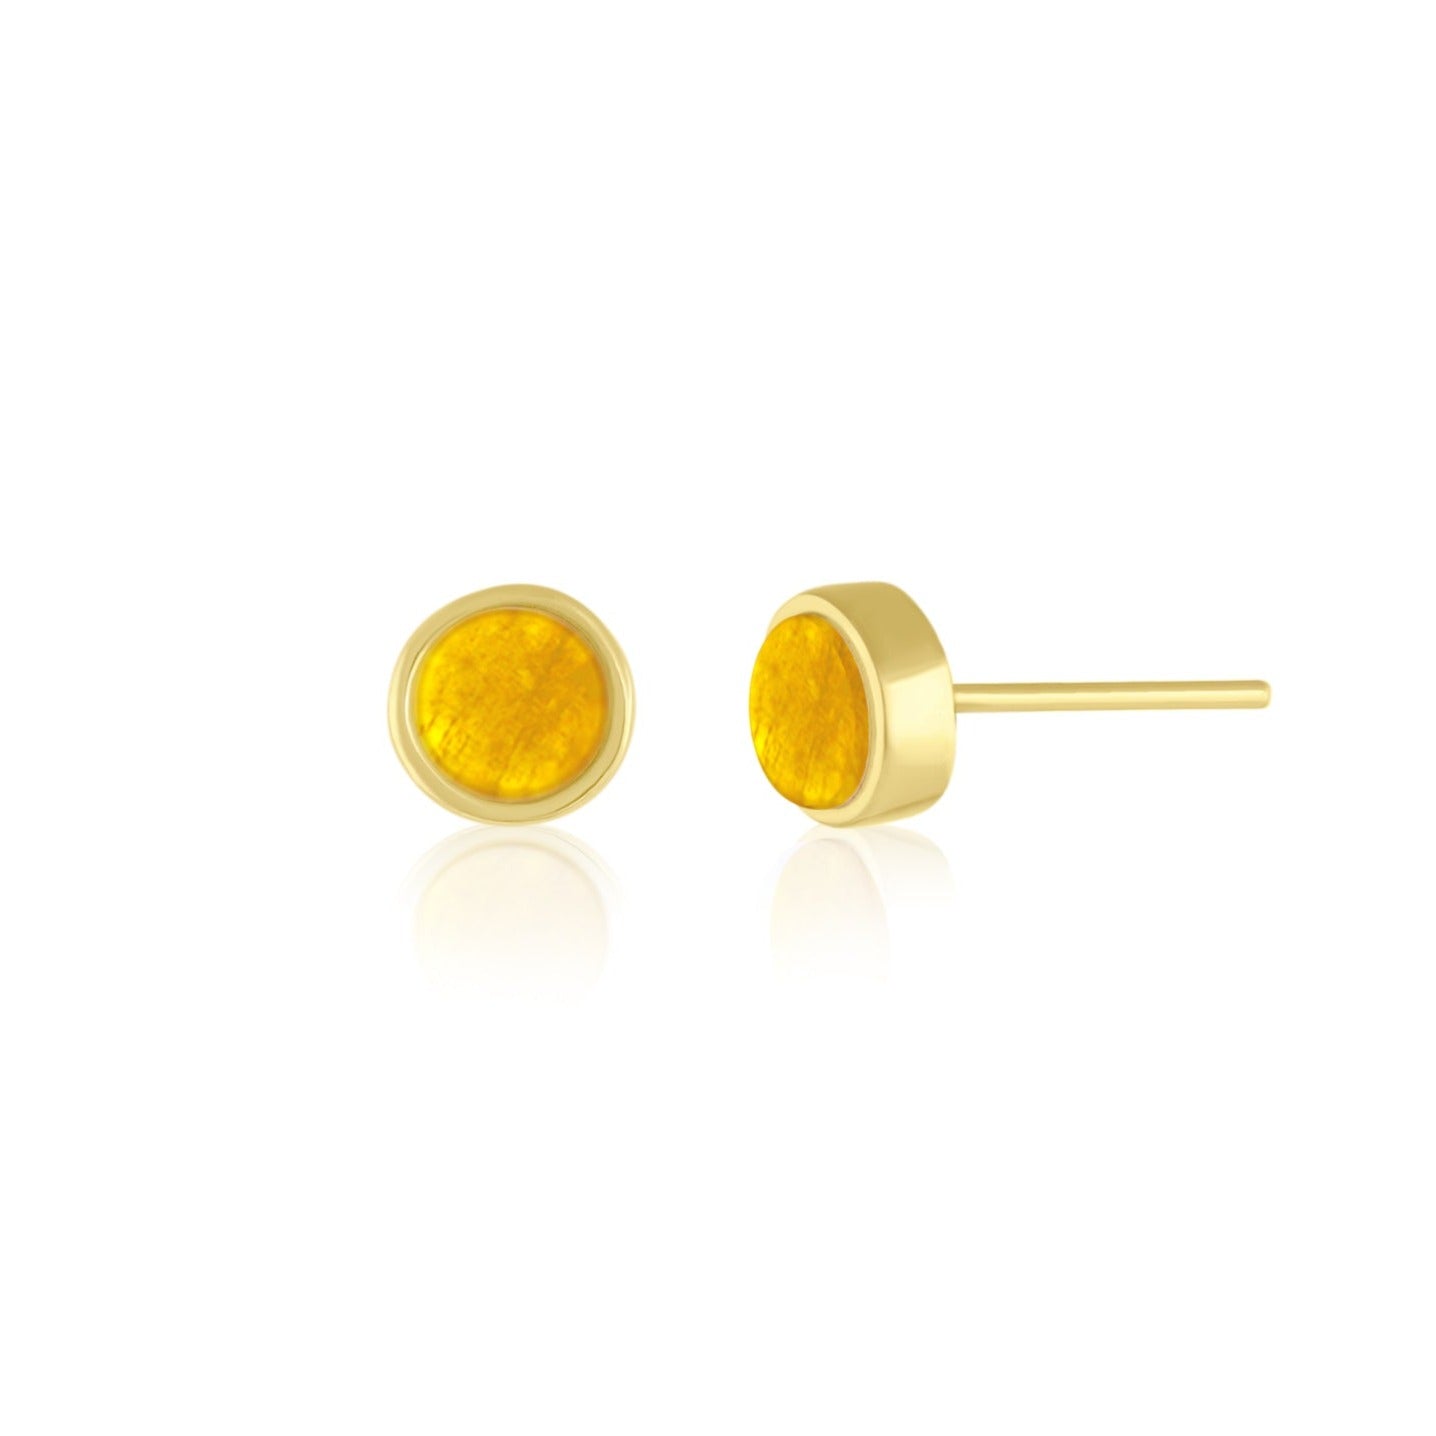 5mm Round Stud Yellow Gold Plated Earrings in Yellow Dyed Feldspar Natural Gemstone Made by Born to Rock. Online Jewelry Based in San Diego California